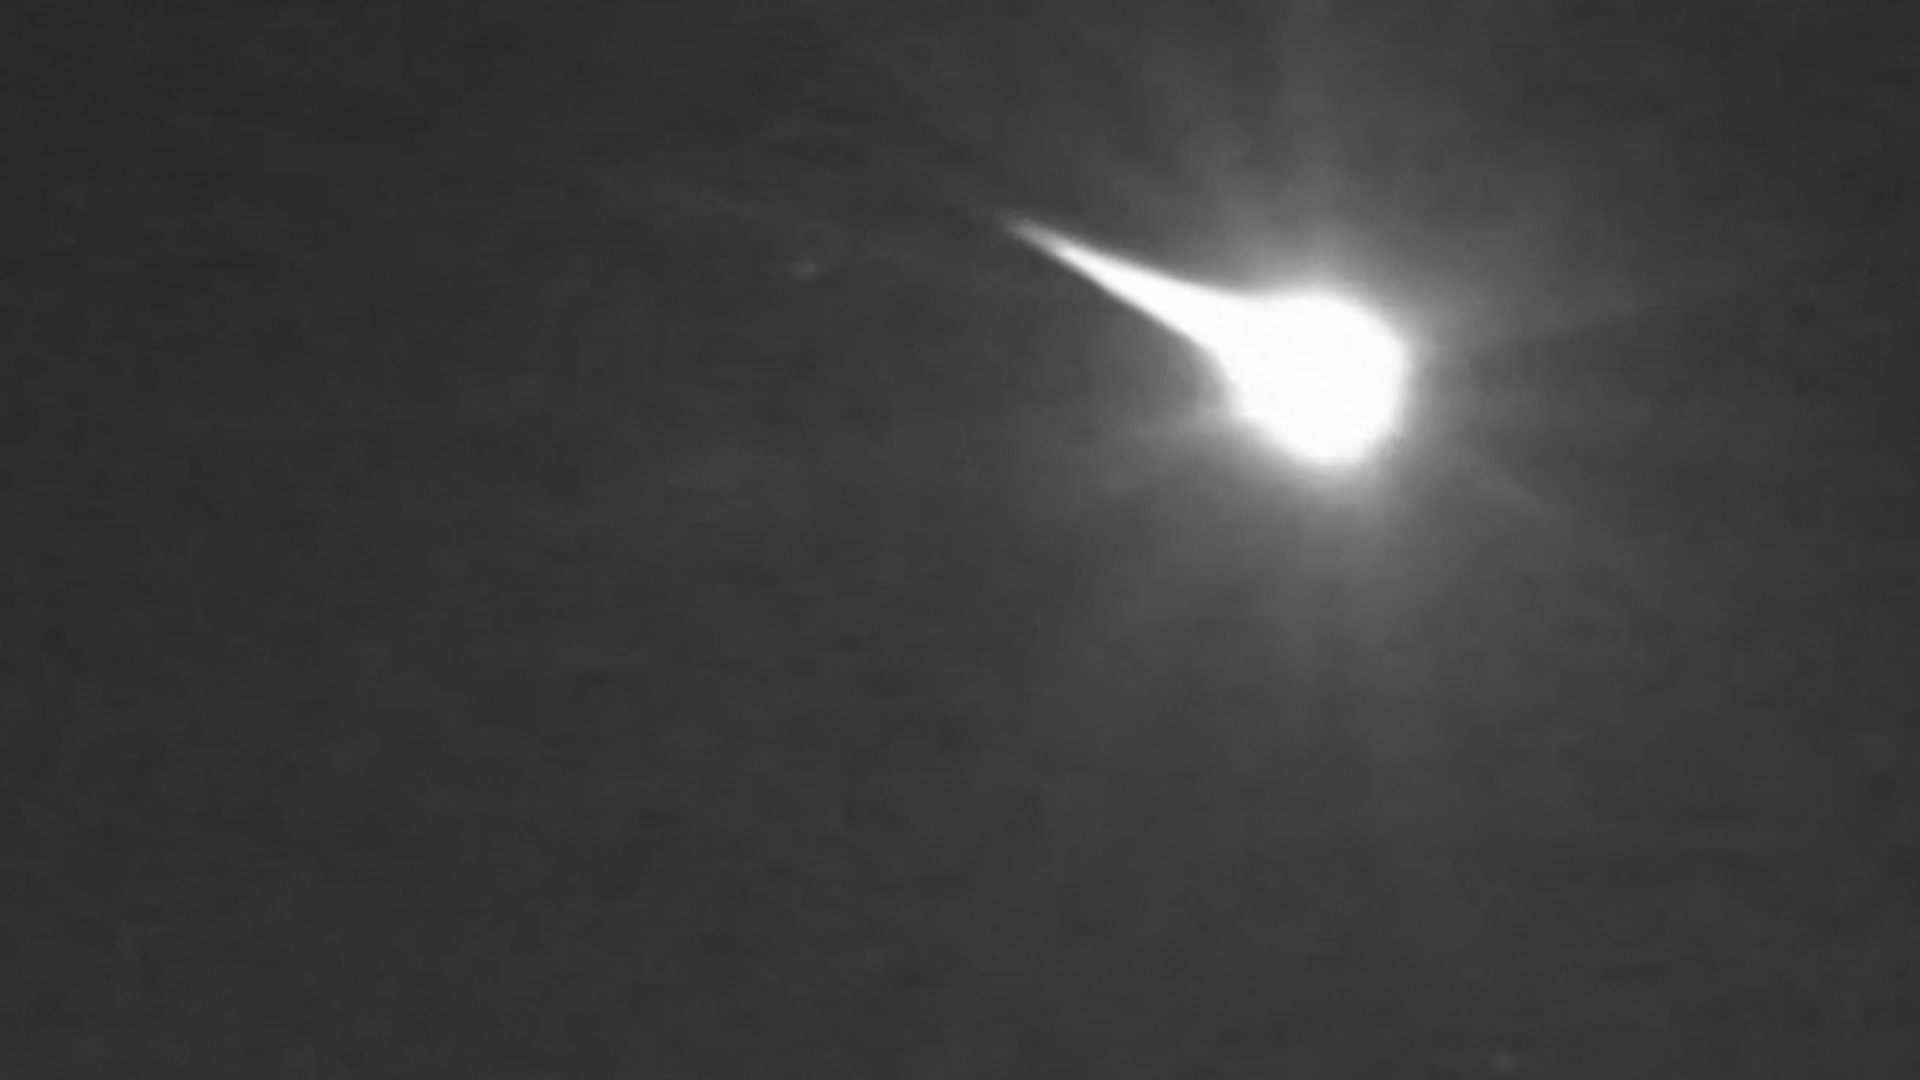 WOW! Check out this meteor as it streaks across the sky in England on Sunday (2/28).